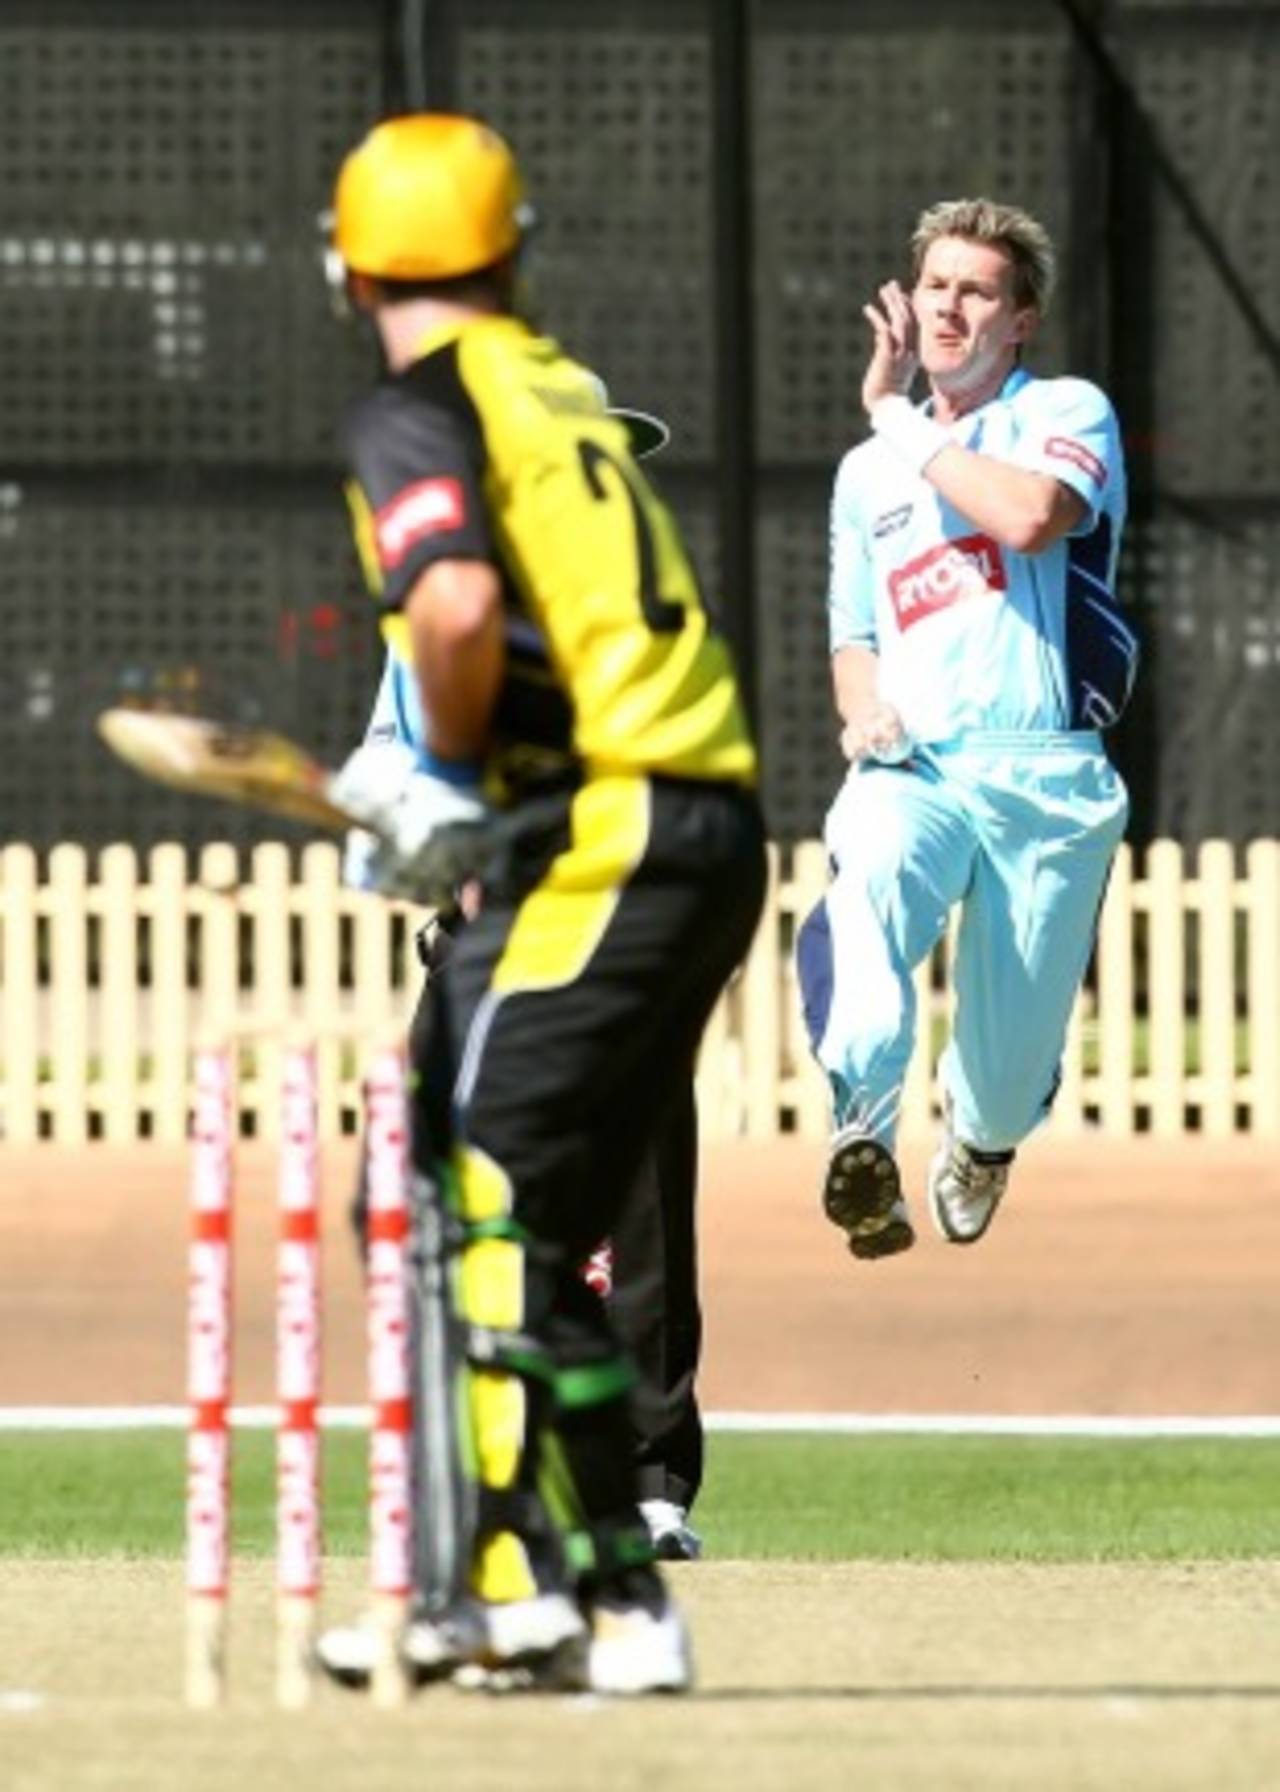 Brett Lee runs in to bowl during his comeback from injury, New South Wales v Western Australia, Ryobi Cup, Hurstville Oval, Sydney, October 17, 2010